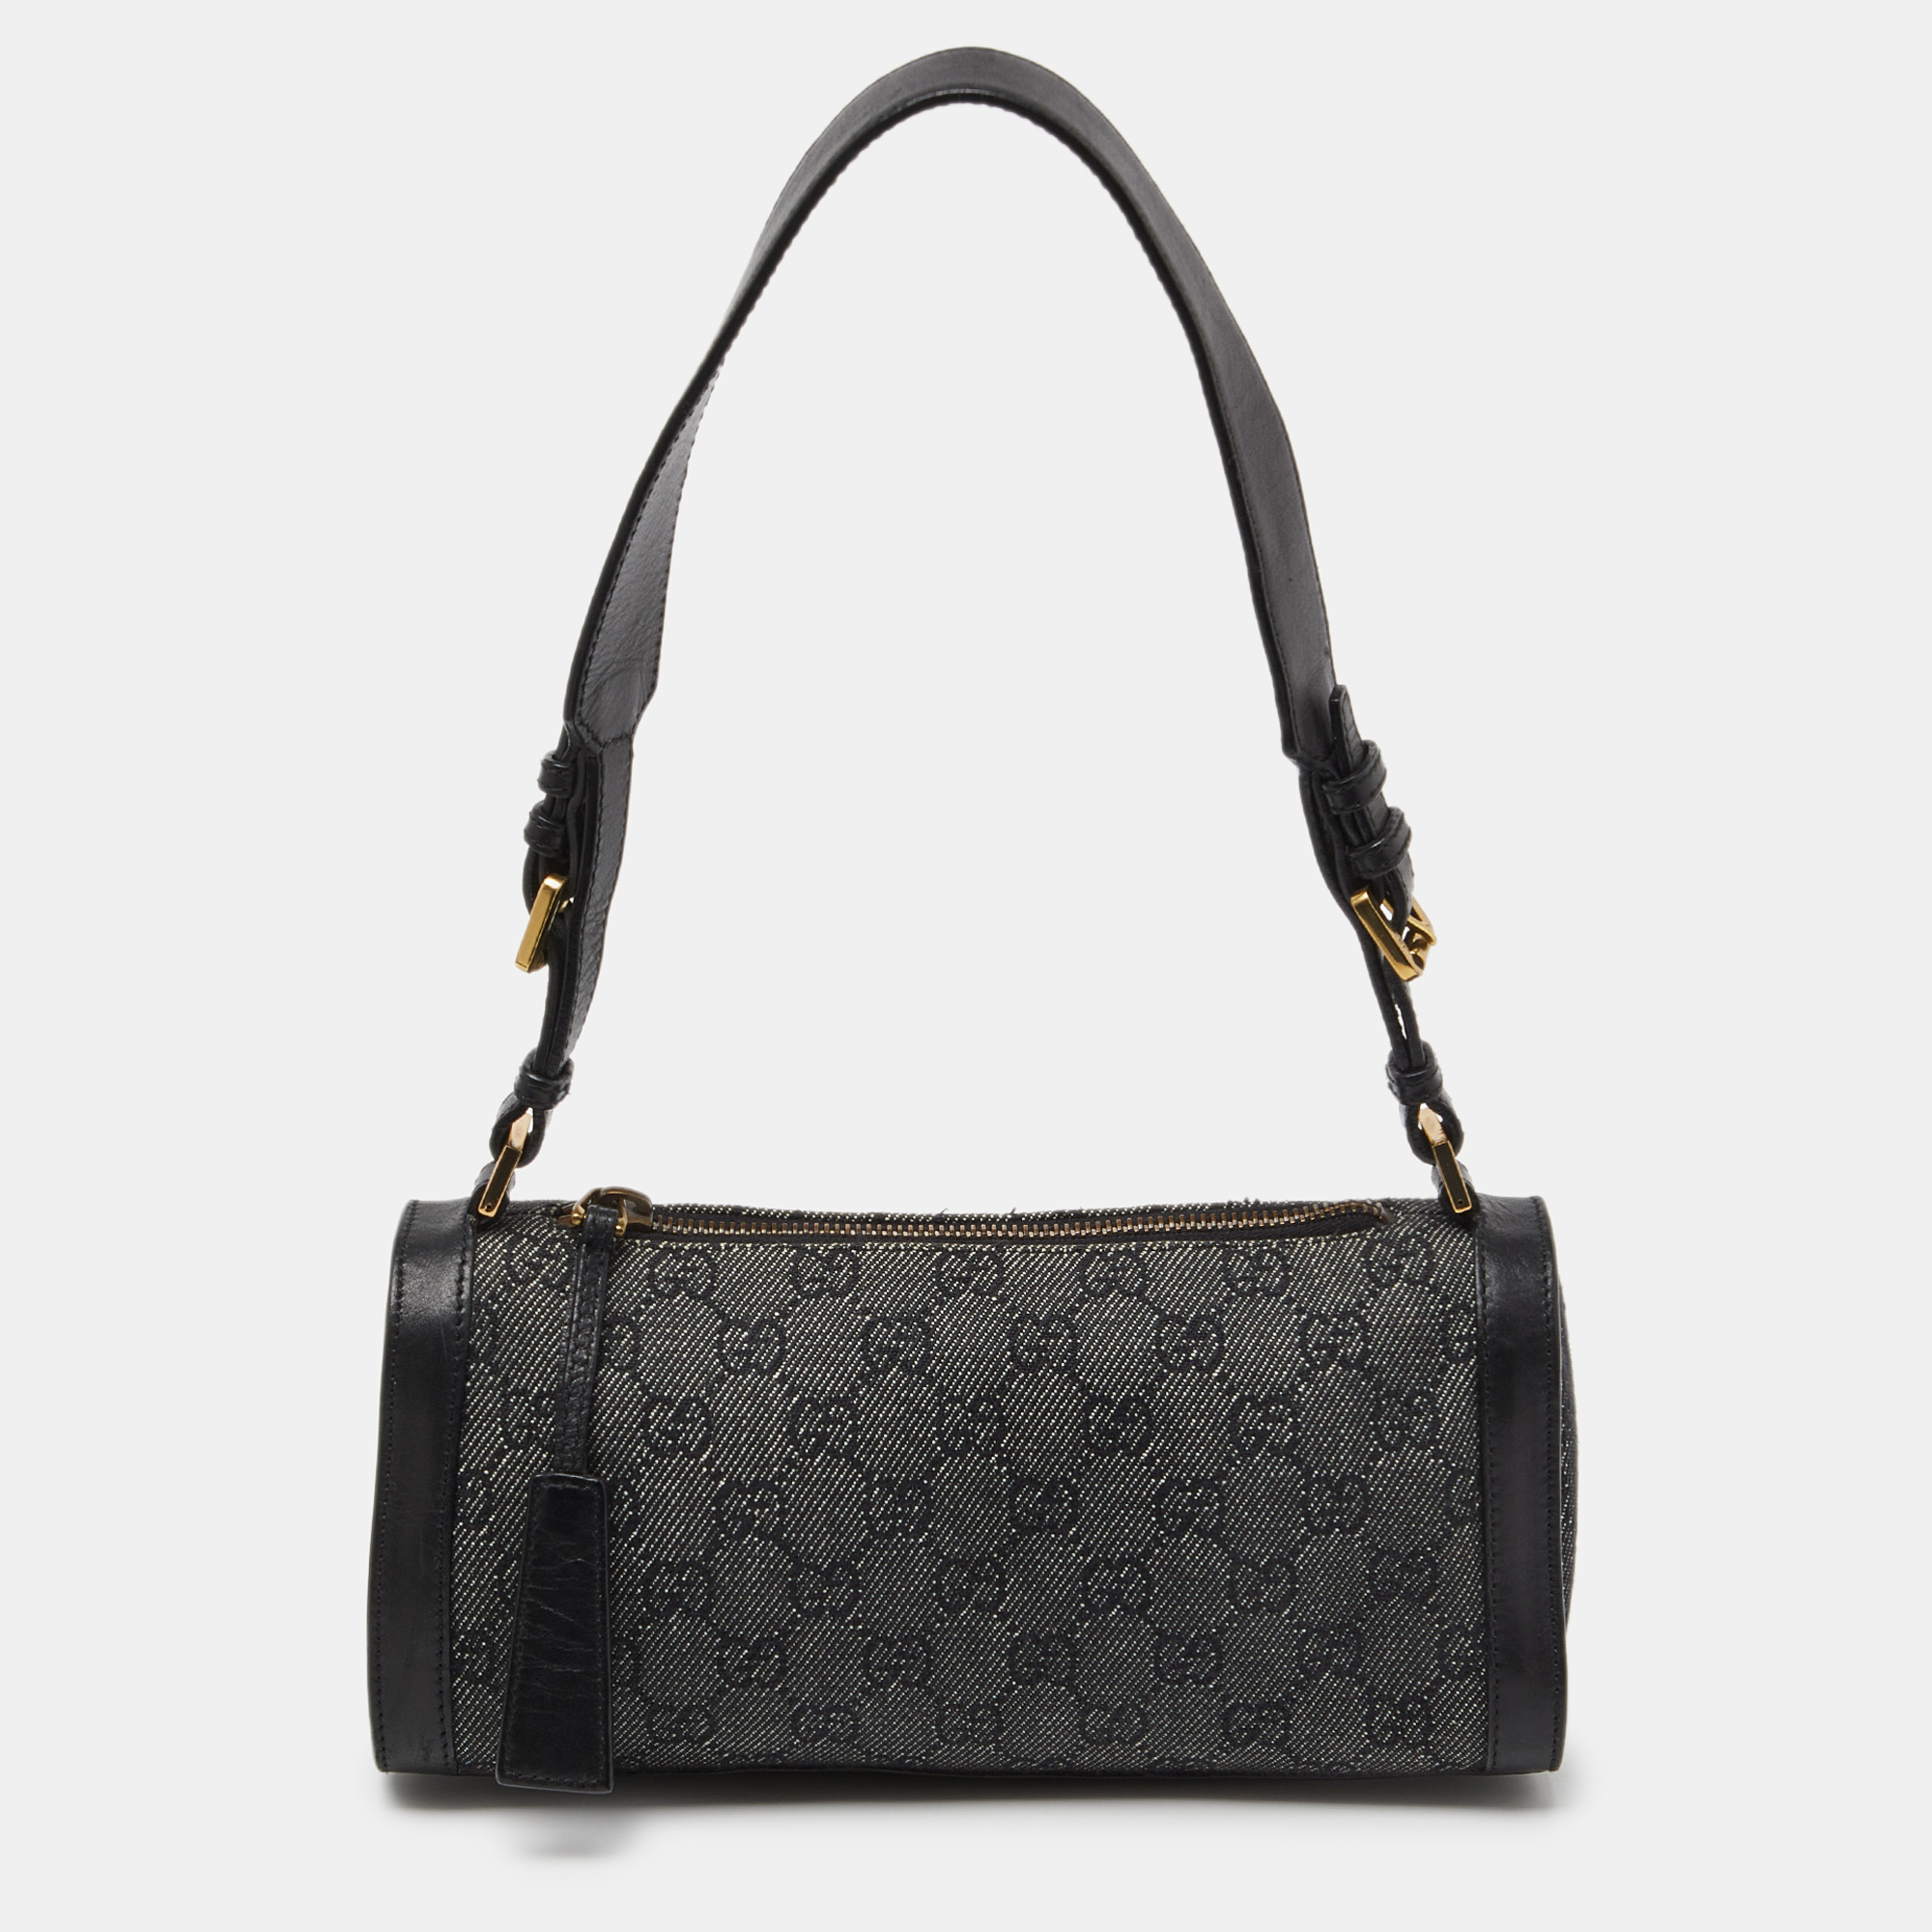 Gucci grey/black gg canvas and leather zip bag